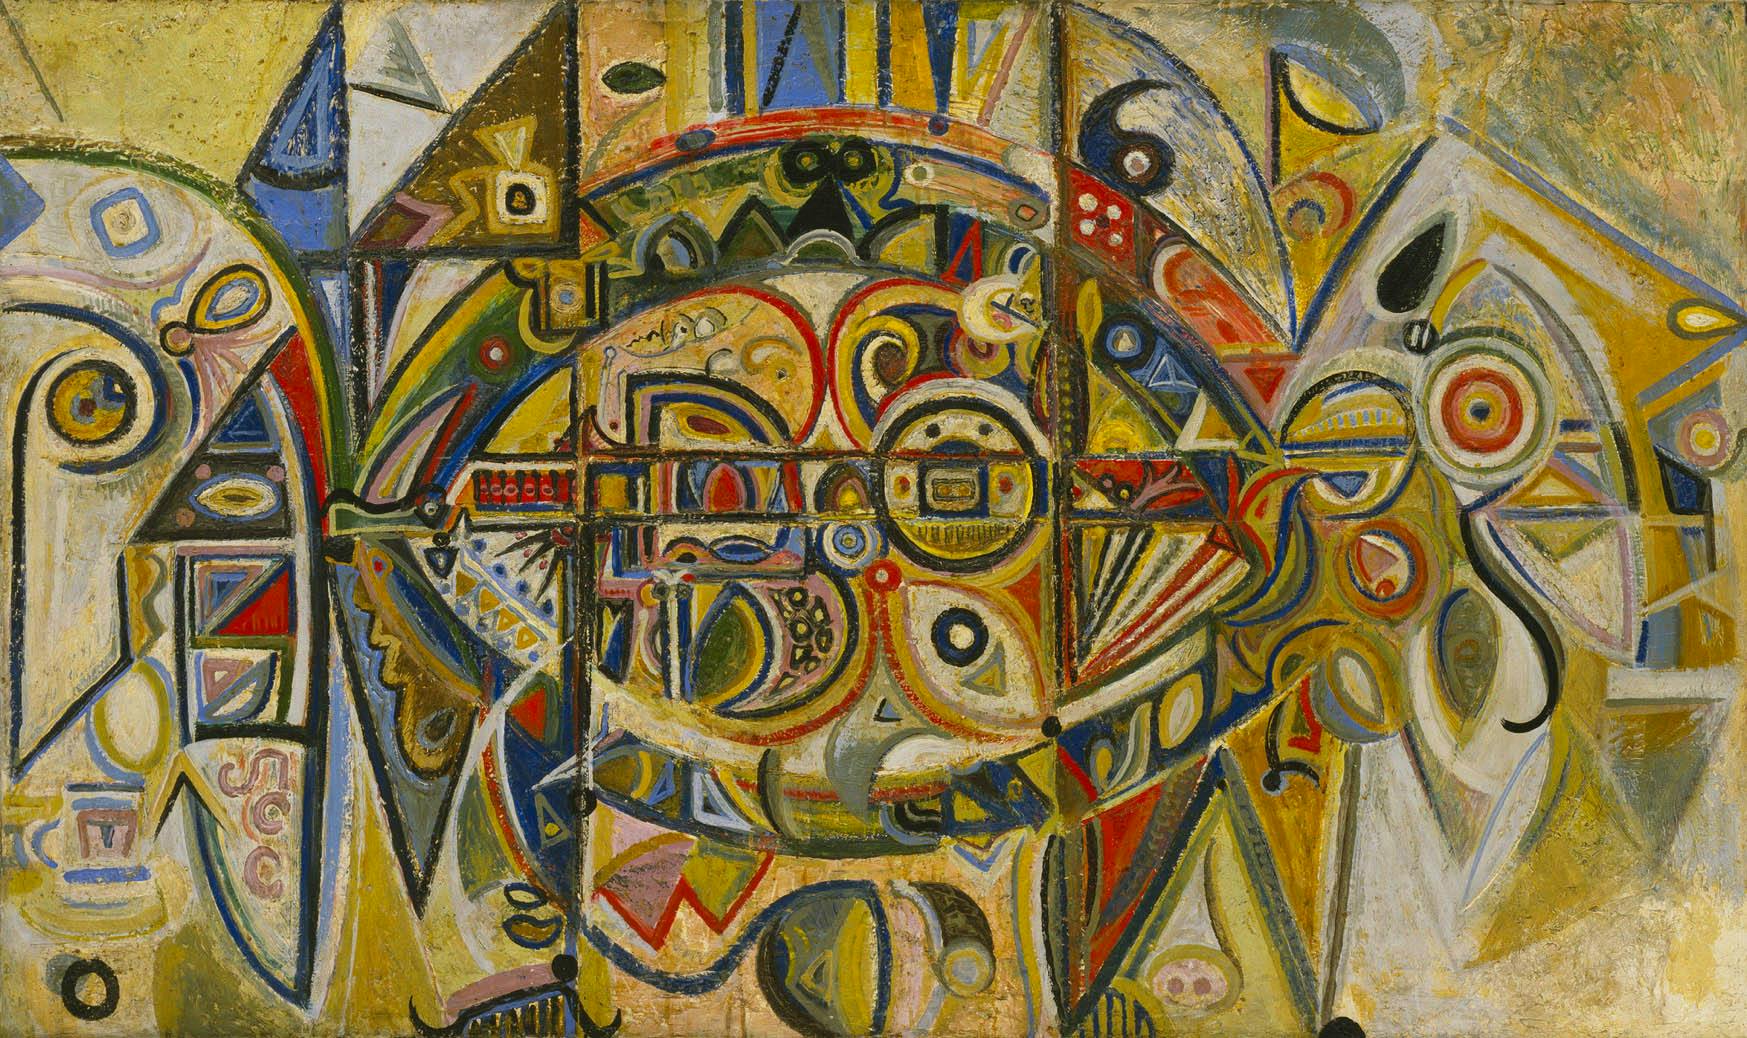 _Desert_, 1940, oil on canvas, 43 x 72 in. (109.2 x 182.9 cm). The Museum of Modern Art, New York, Given anonymously (1099.1969)
 – The Richard Pousette-Dart Foundation